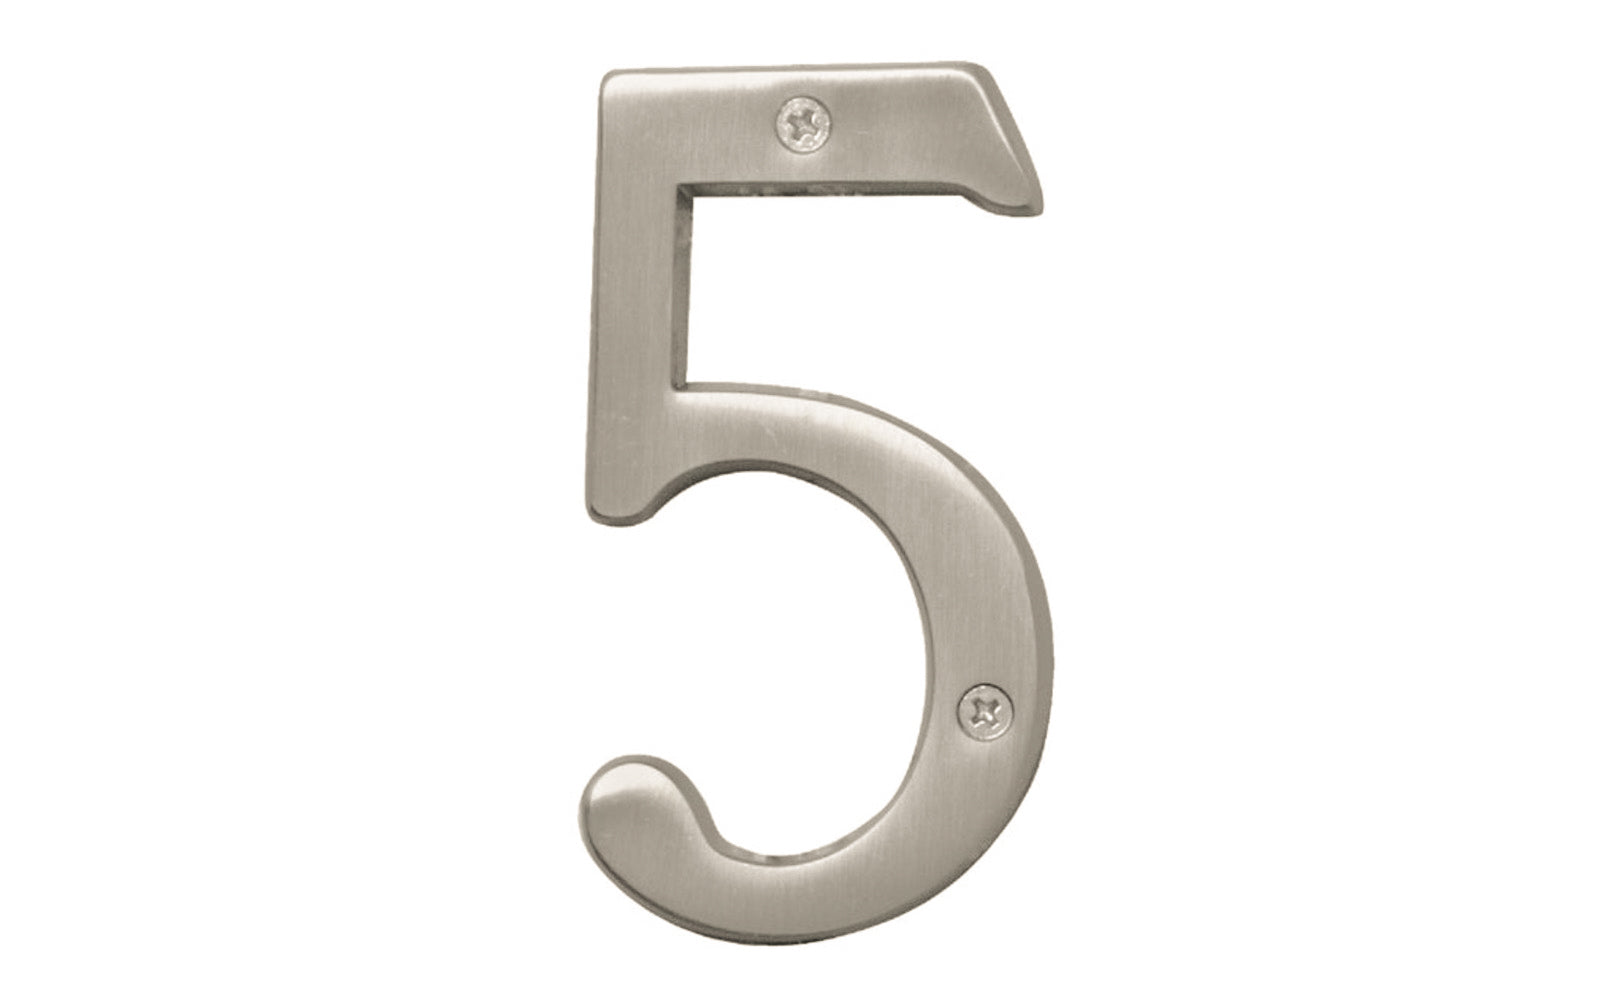 Number Five House Number in a 4" size. Satin nickel finish. Includes two phillips flat head screws. #5 house number. Hy-Ko Model BR-43SN/5.  Hardware house numbers for outdoors. Includes screws. 029069309350. #5 Satin Nickel House Number - 4" Size